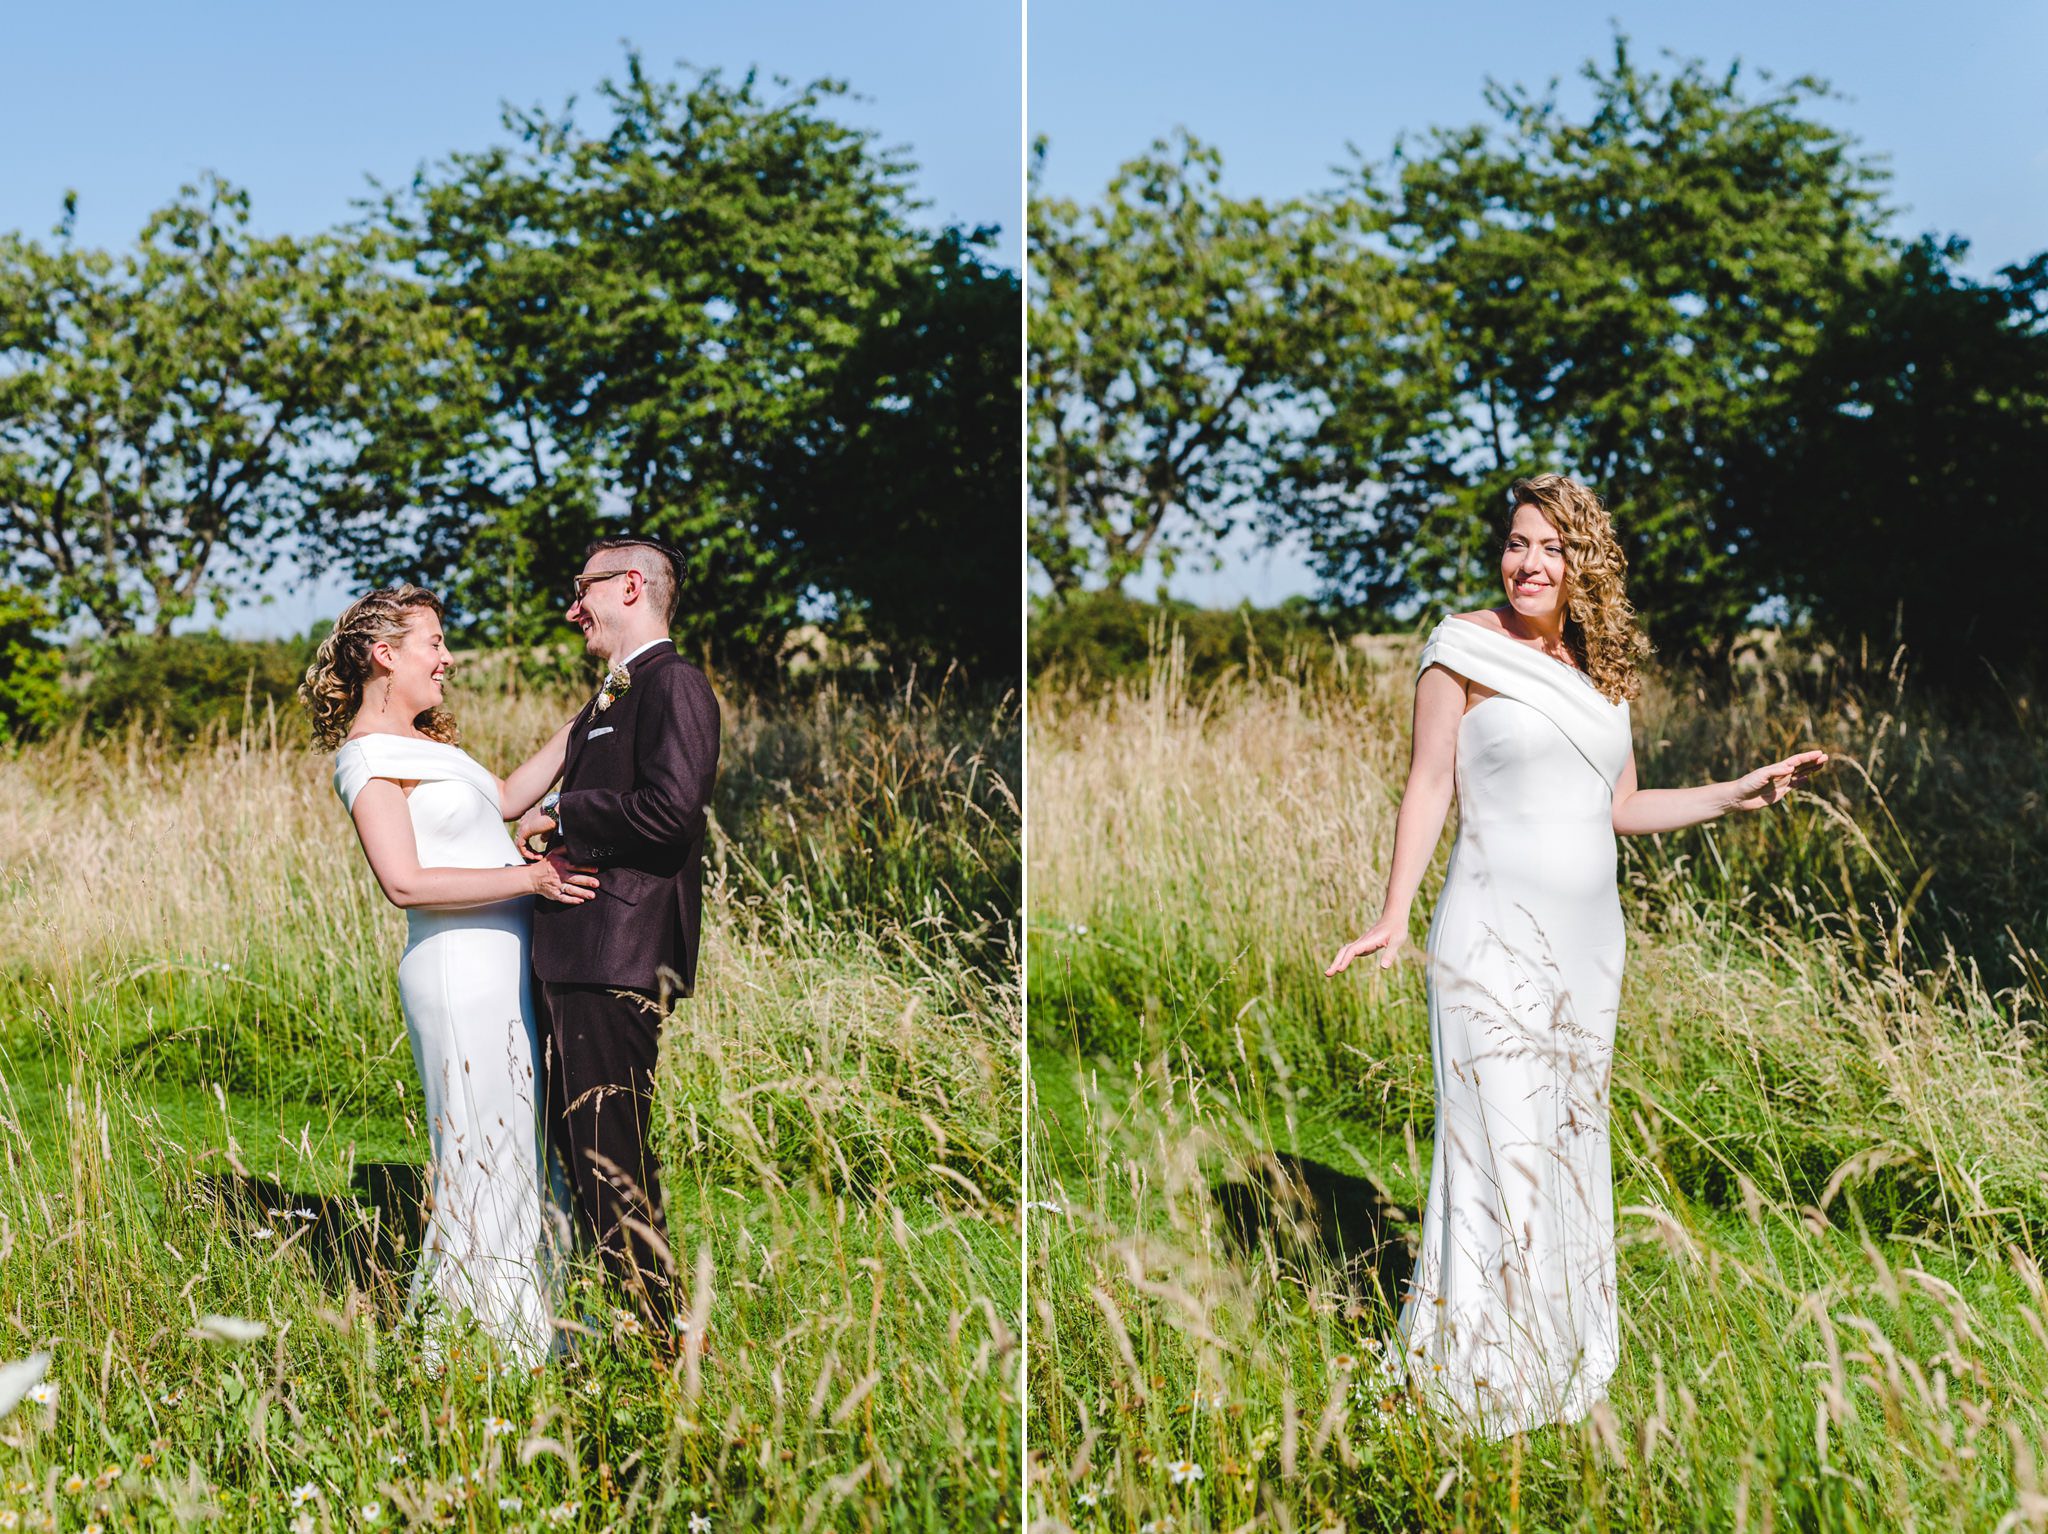 A couple standing in a field on their wedding day